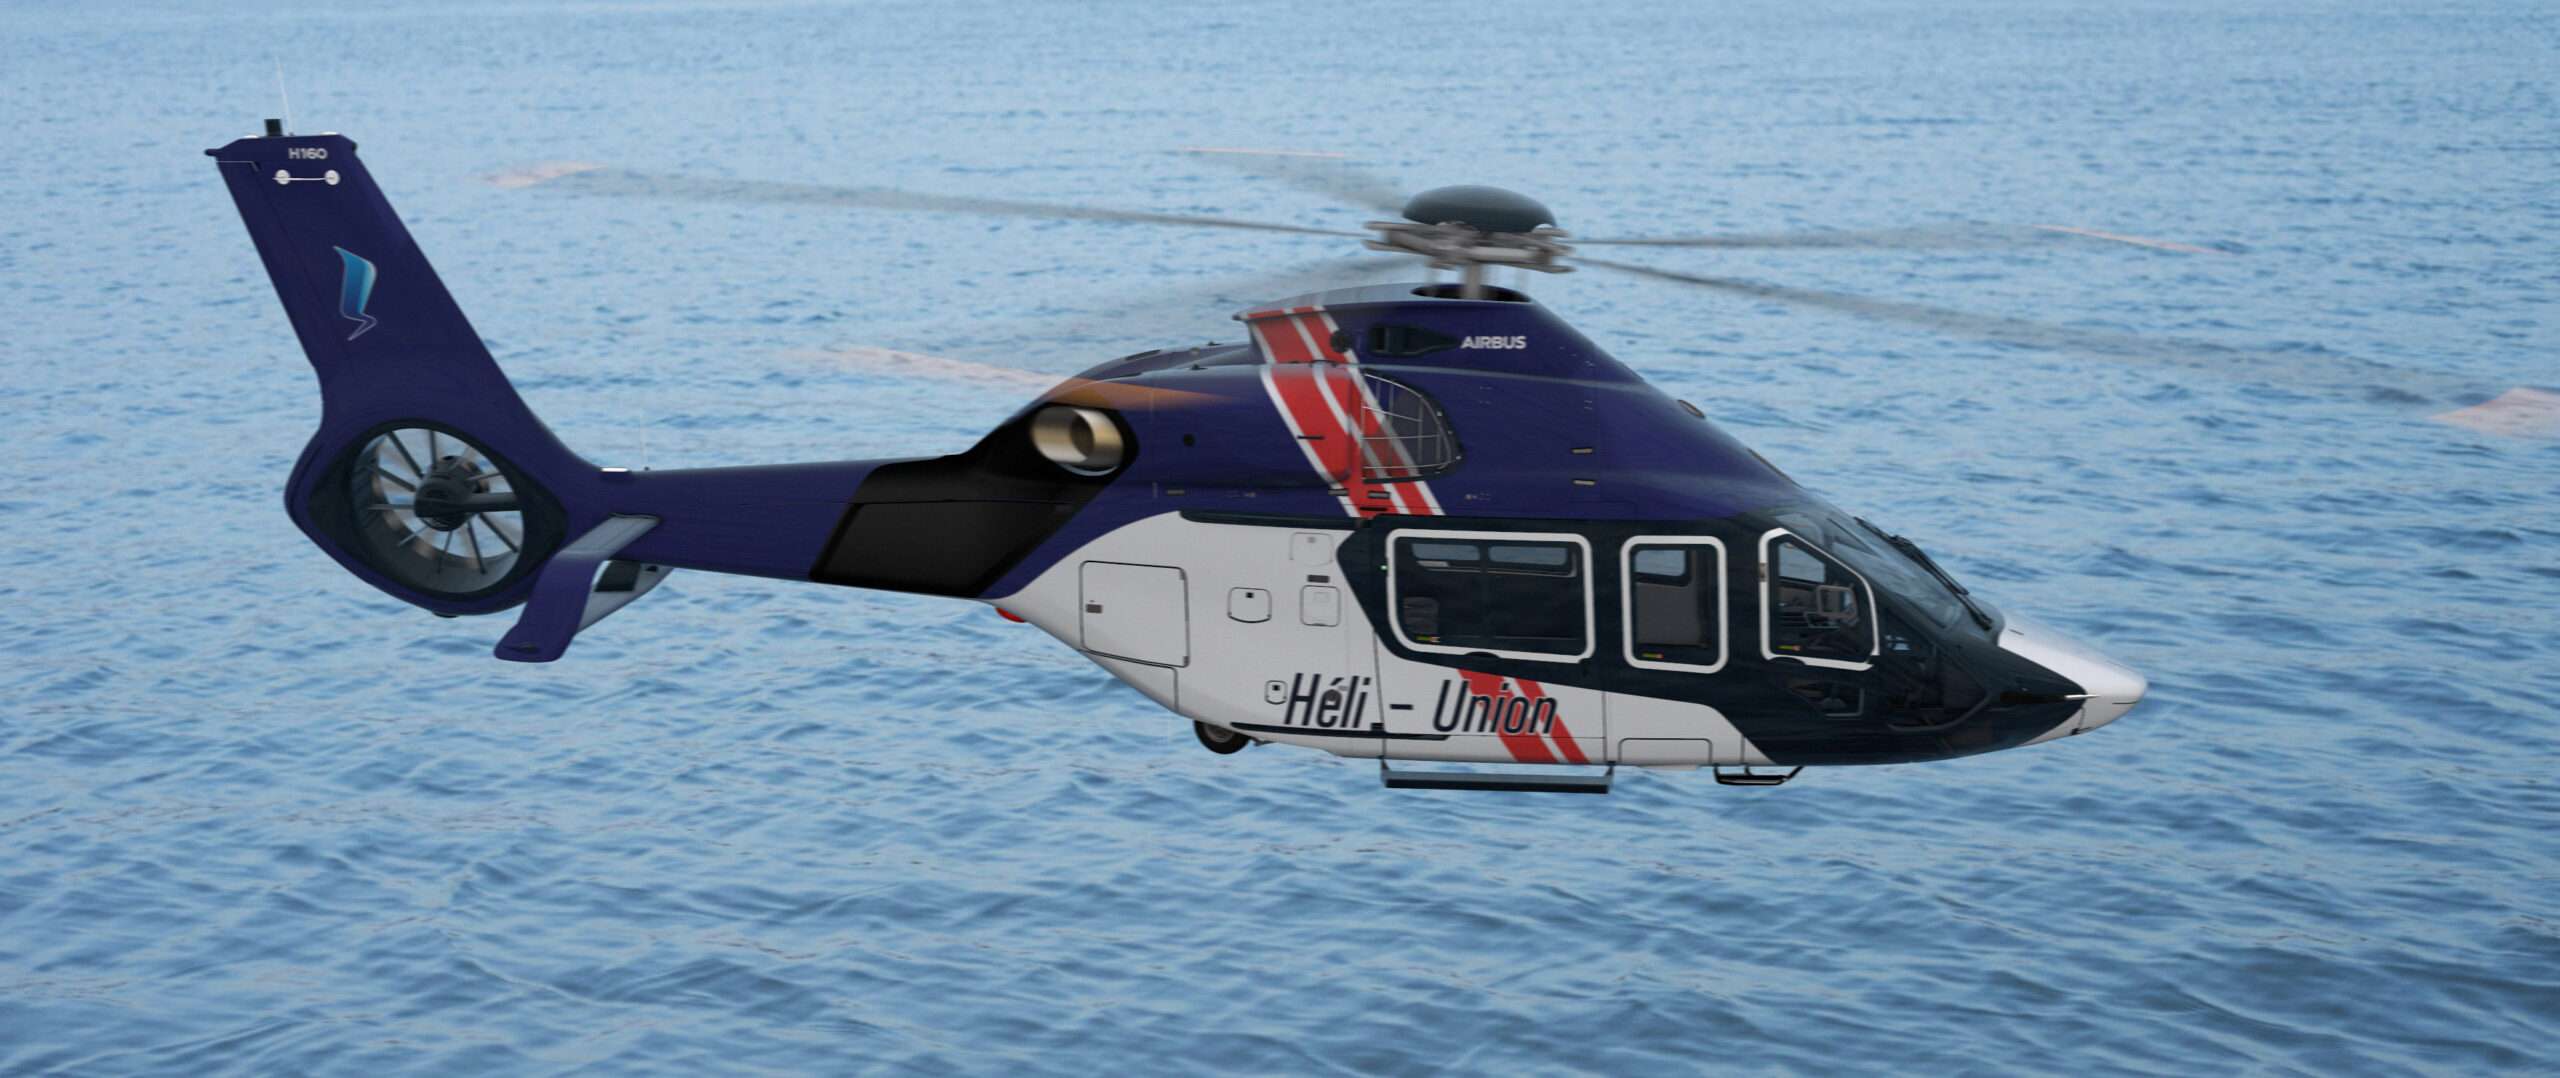 H160 helicopter